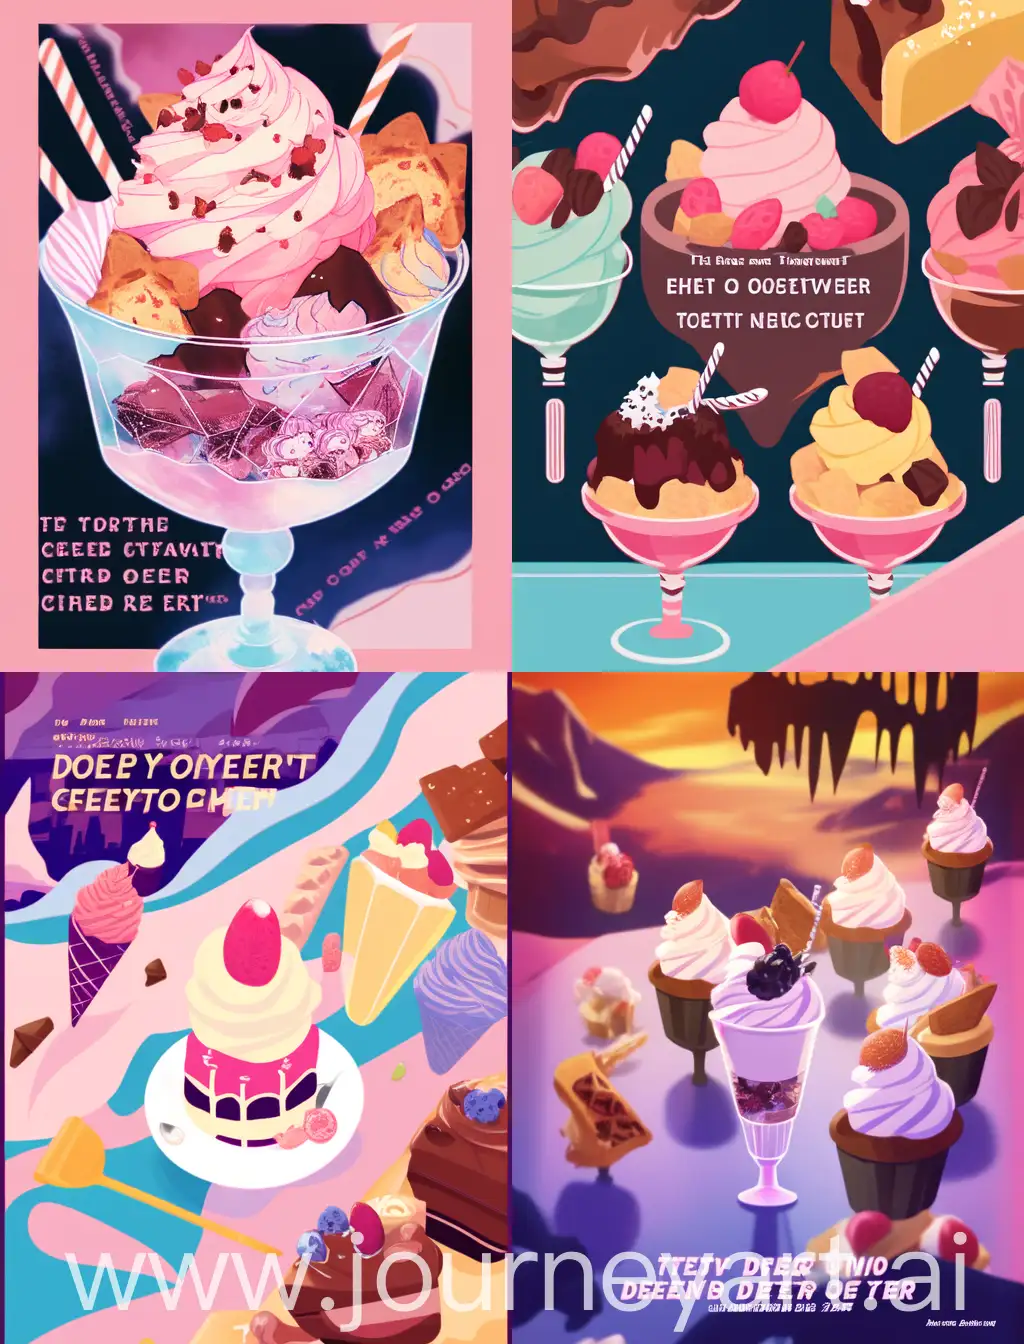 give me a aesthetic poster with some desserts and the quote"There is no better way to bring people together than with desserts"